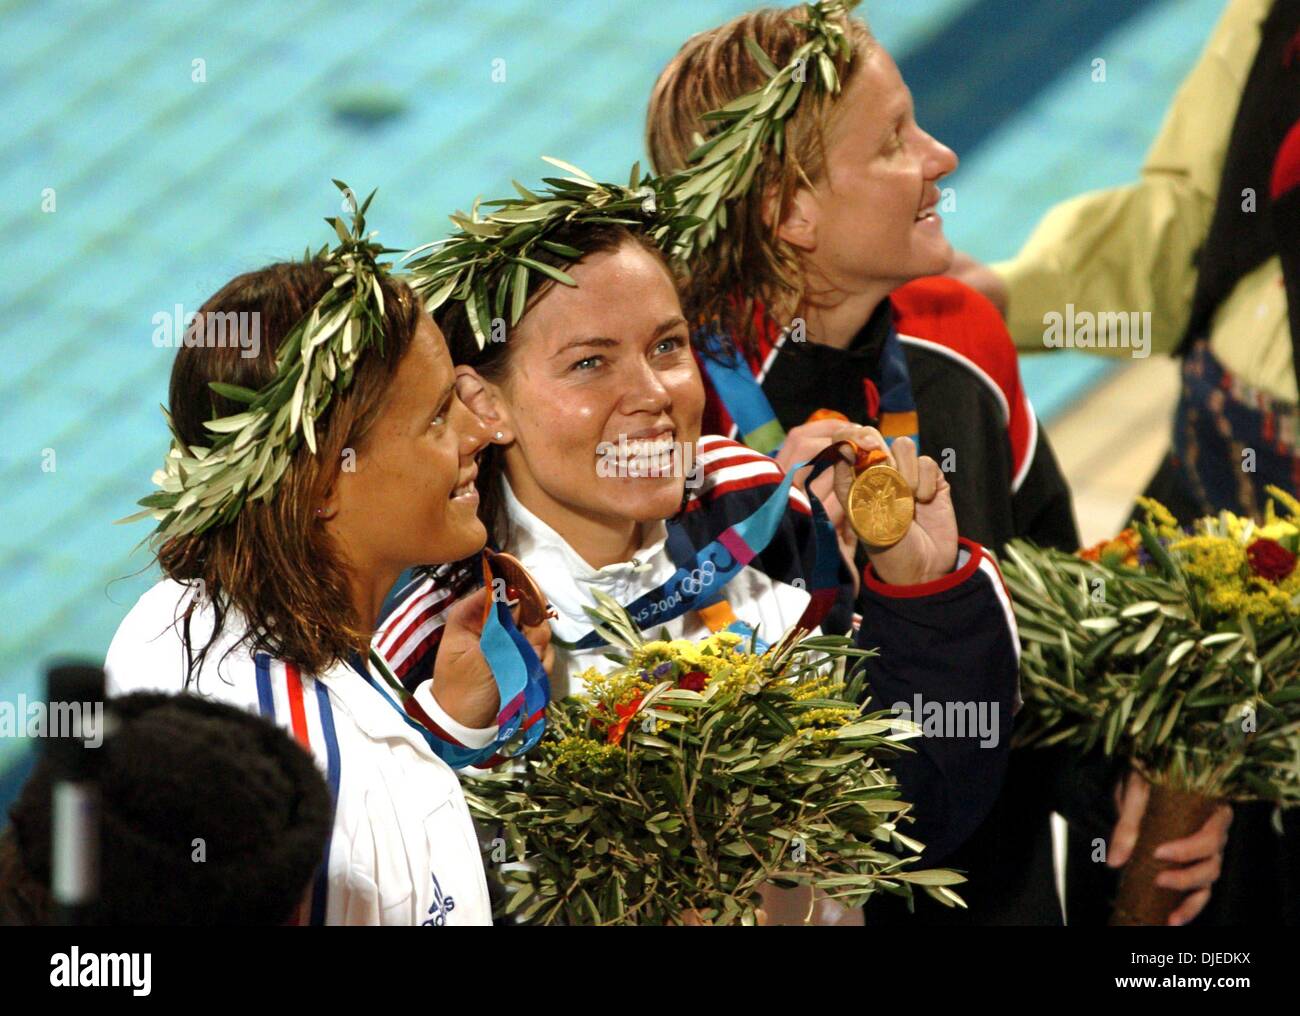 KRT SPORTS STORY SLUGGED: OLY-SWIMMING KRT PHOTO BY KARL MONDON/CONTRA COSTA TIMES (August 16) ATHENS, GREECE  -- Gold medalist Natalie Coughlin, center, celebrates with silver medalist Kirsty Coventry of Zimbabwe, right, and bronze medalist Laure Manaudou of France after the 100-meter backstroke on Monday, August 16, 2004, during the 2004 Olympic Games in Athens, Greece. (gsb) 200 Stock Photo